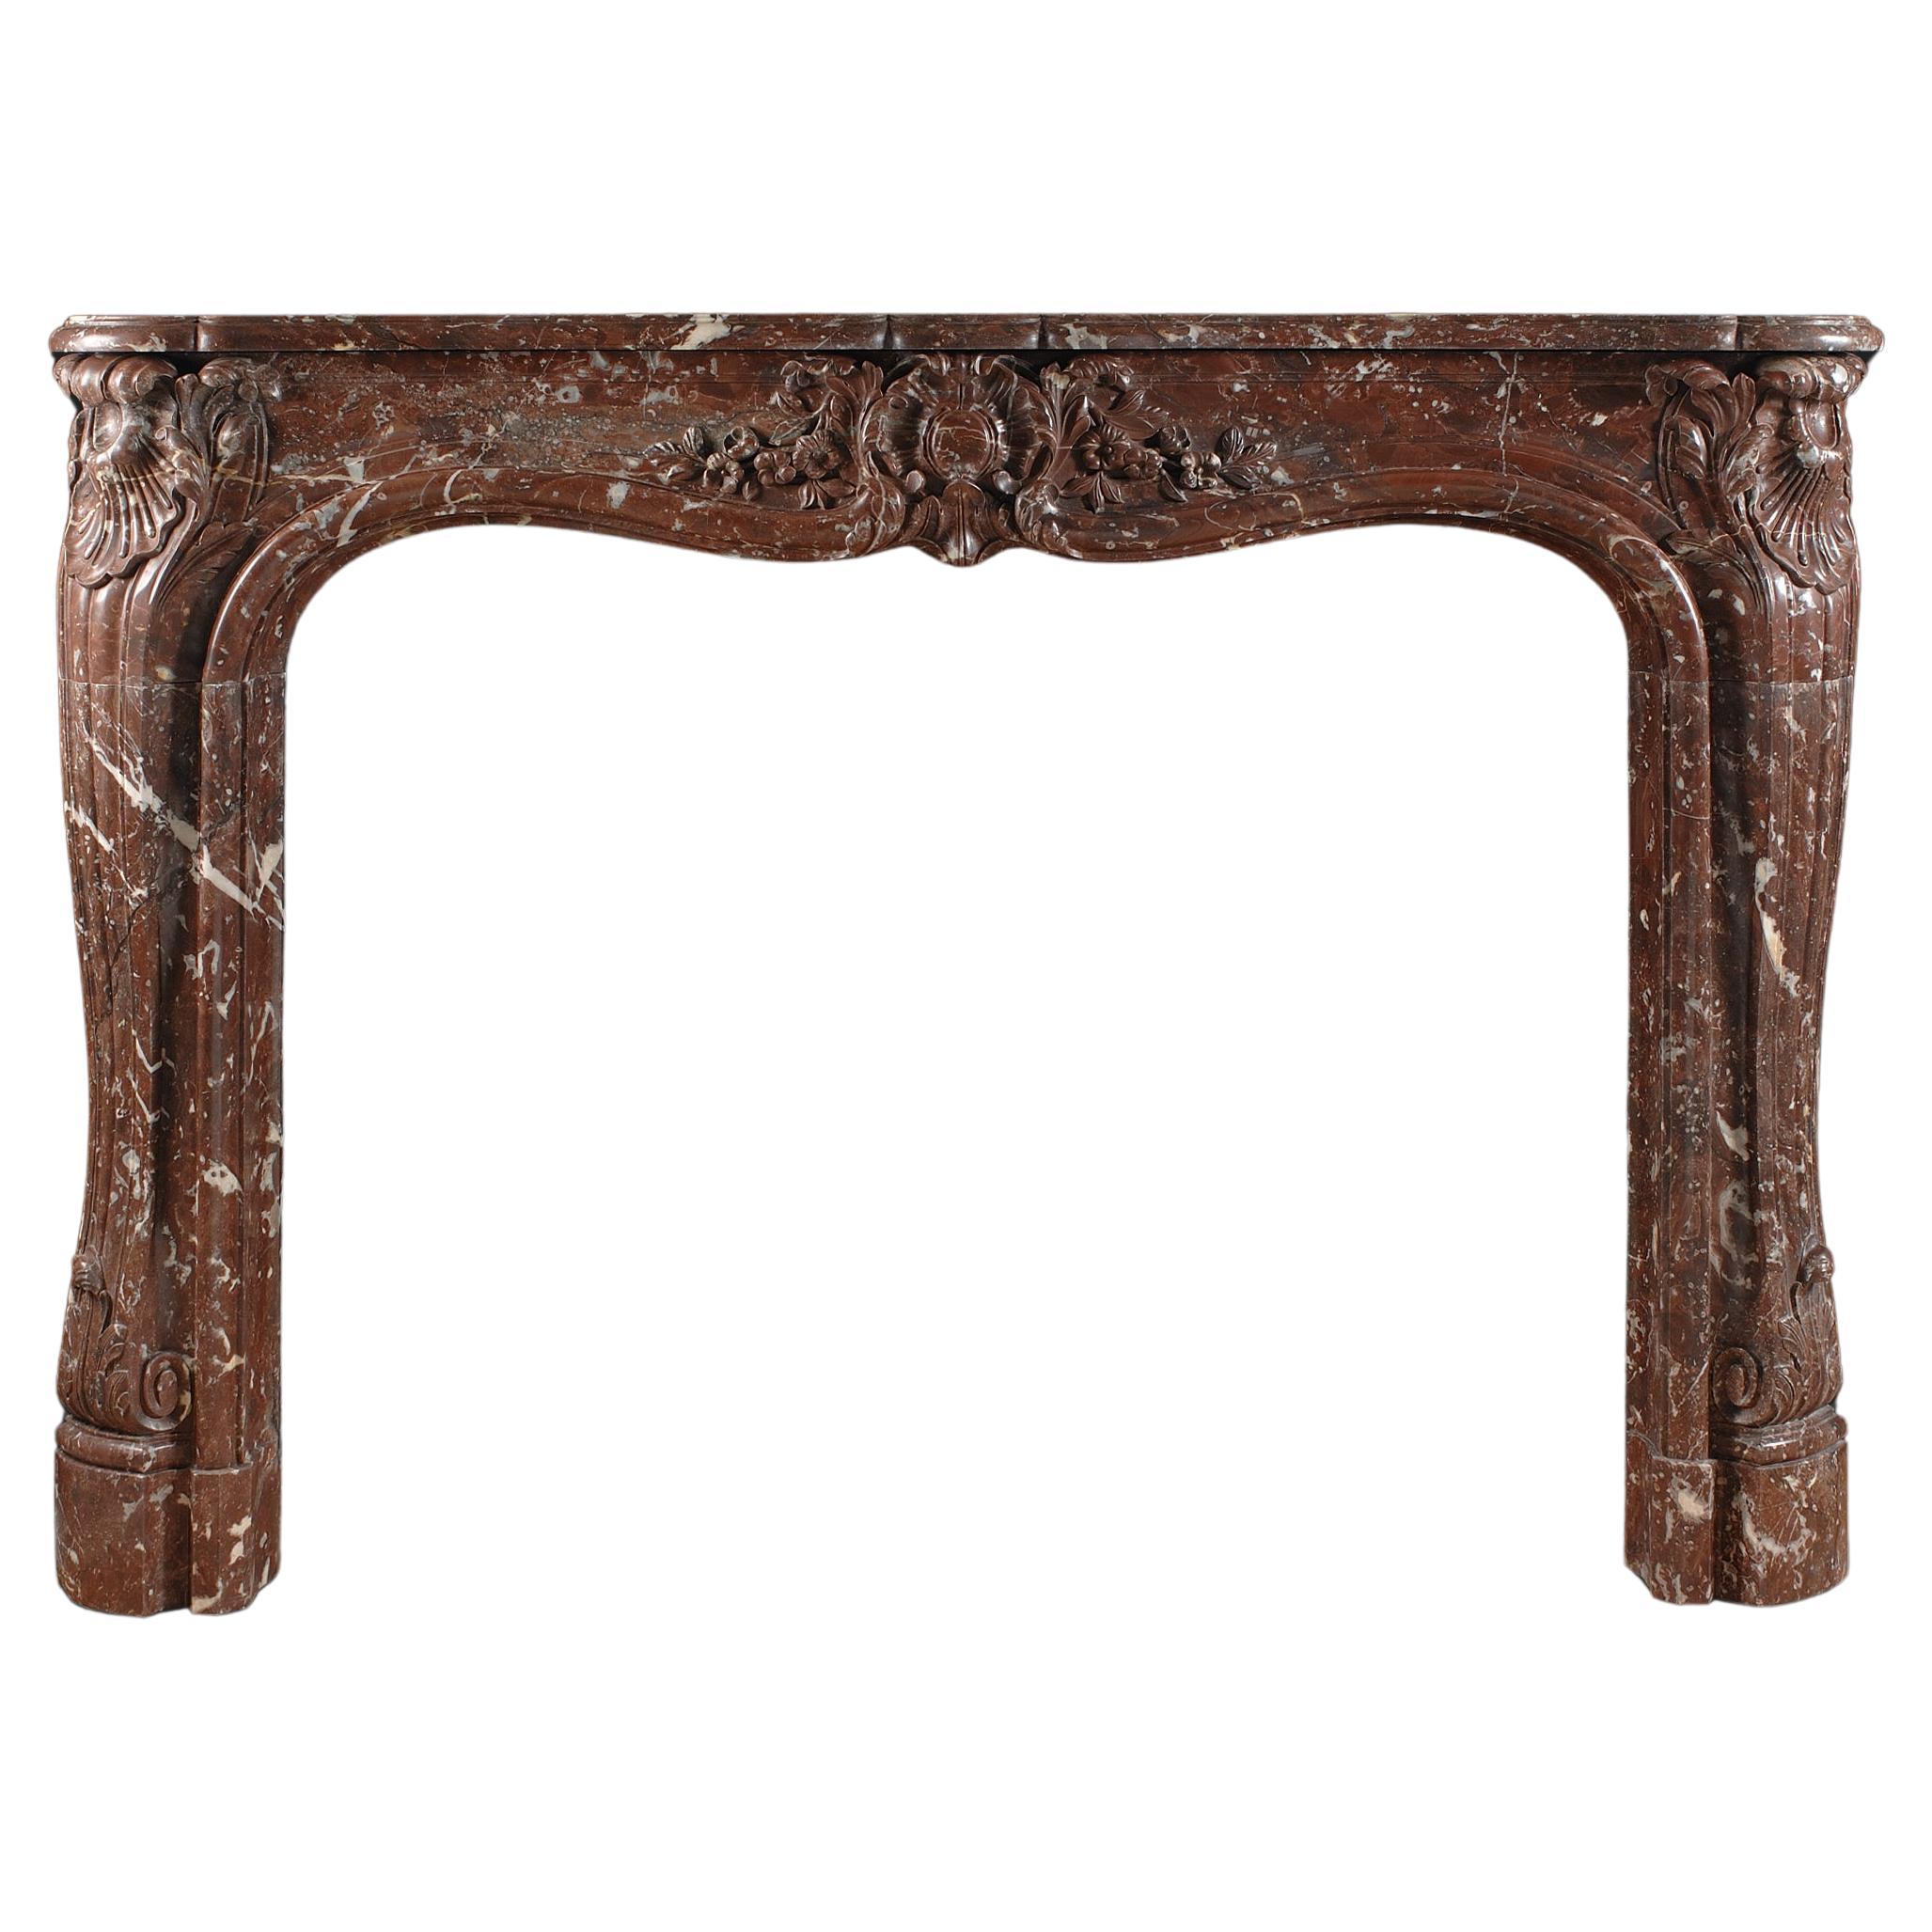 Typical 18th century Louis XV style marble fireplace model made in a old Belgium For Sale